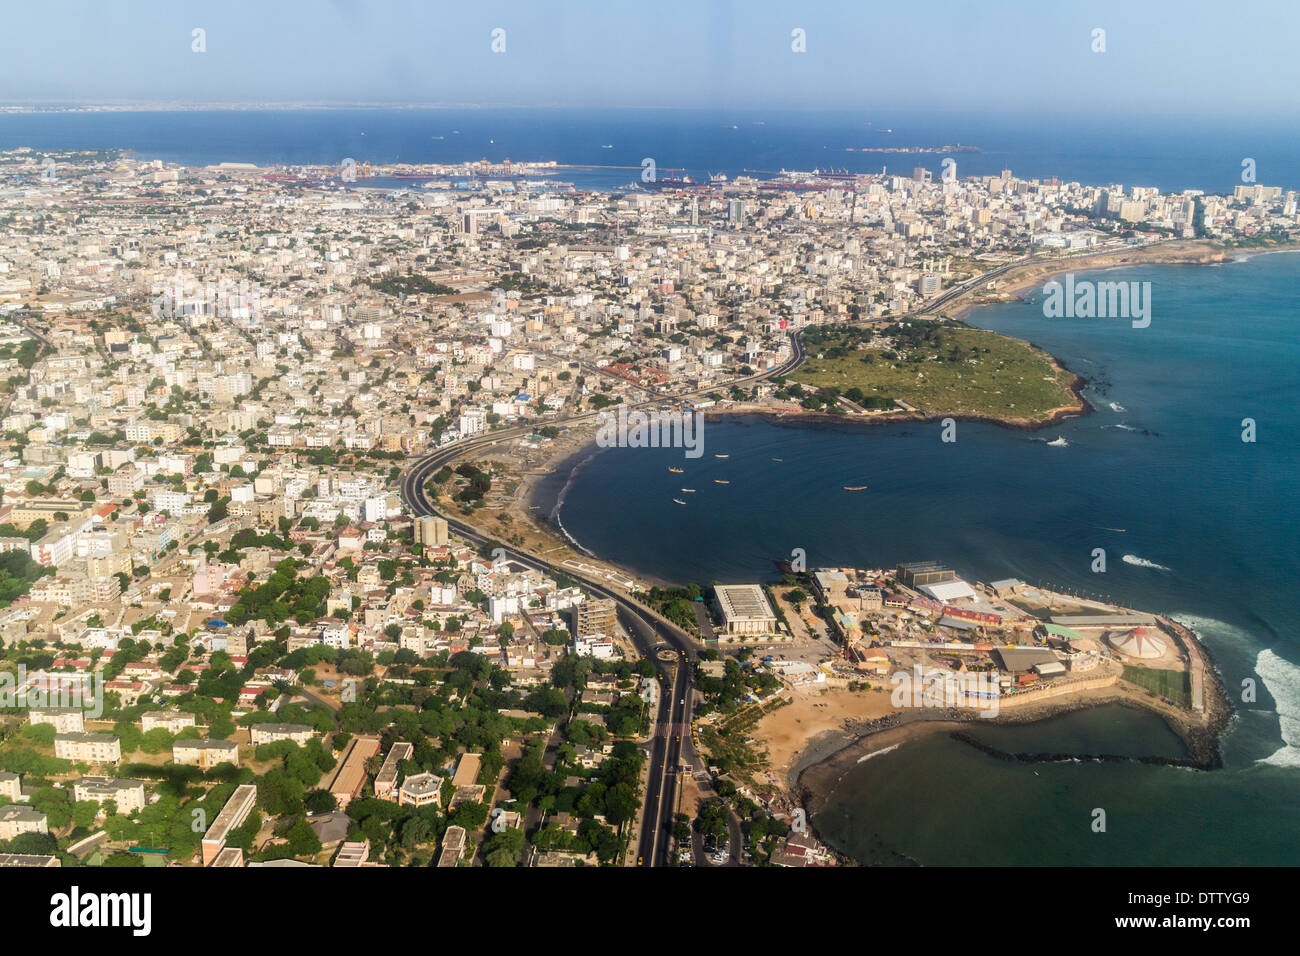 Aerial view of the city of Dakar, Senegal, by the coast of the Atlantic city Stock Photo